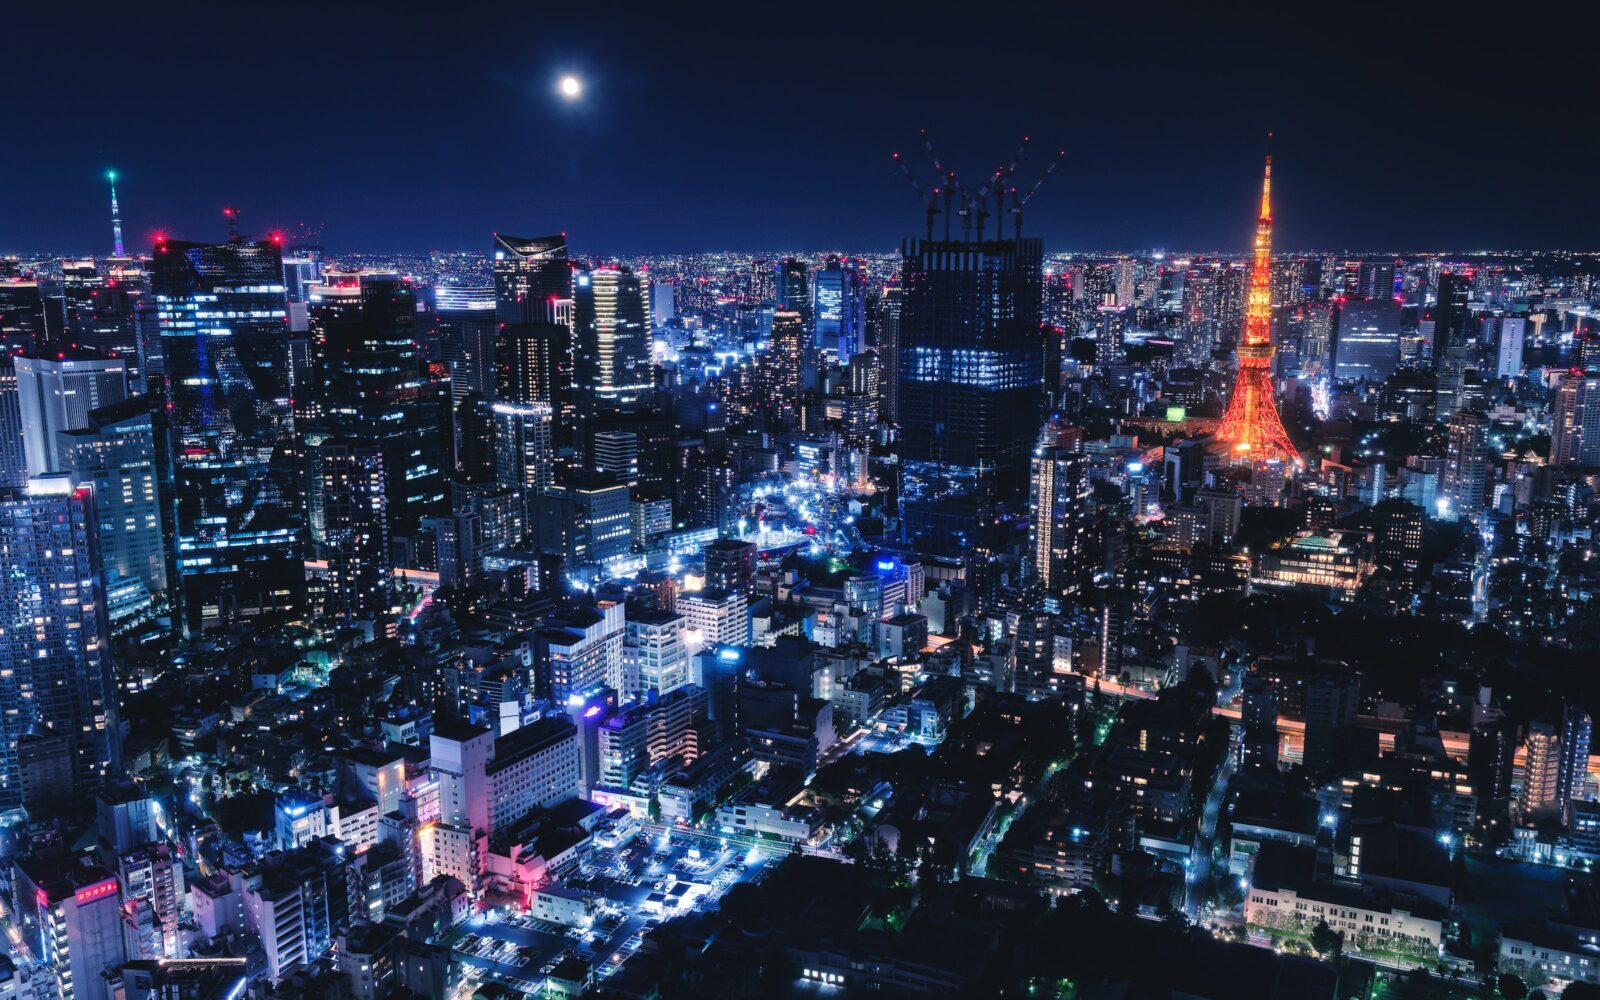 Discover your global future with an Internship in Japan